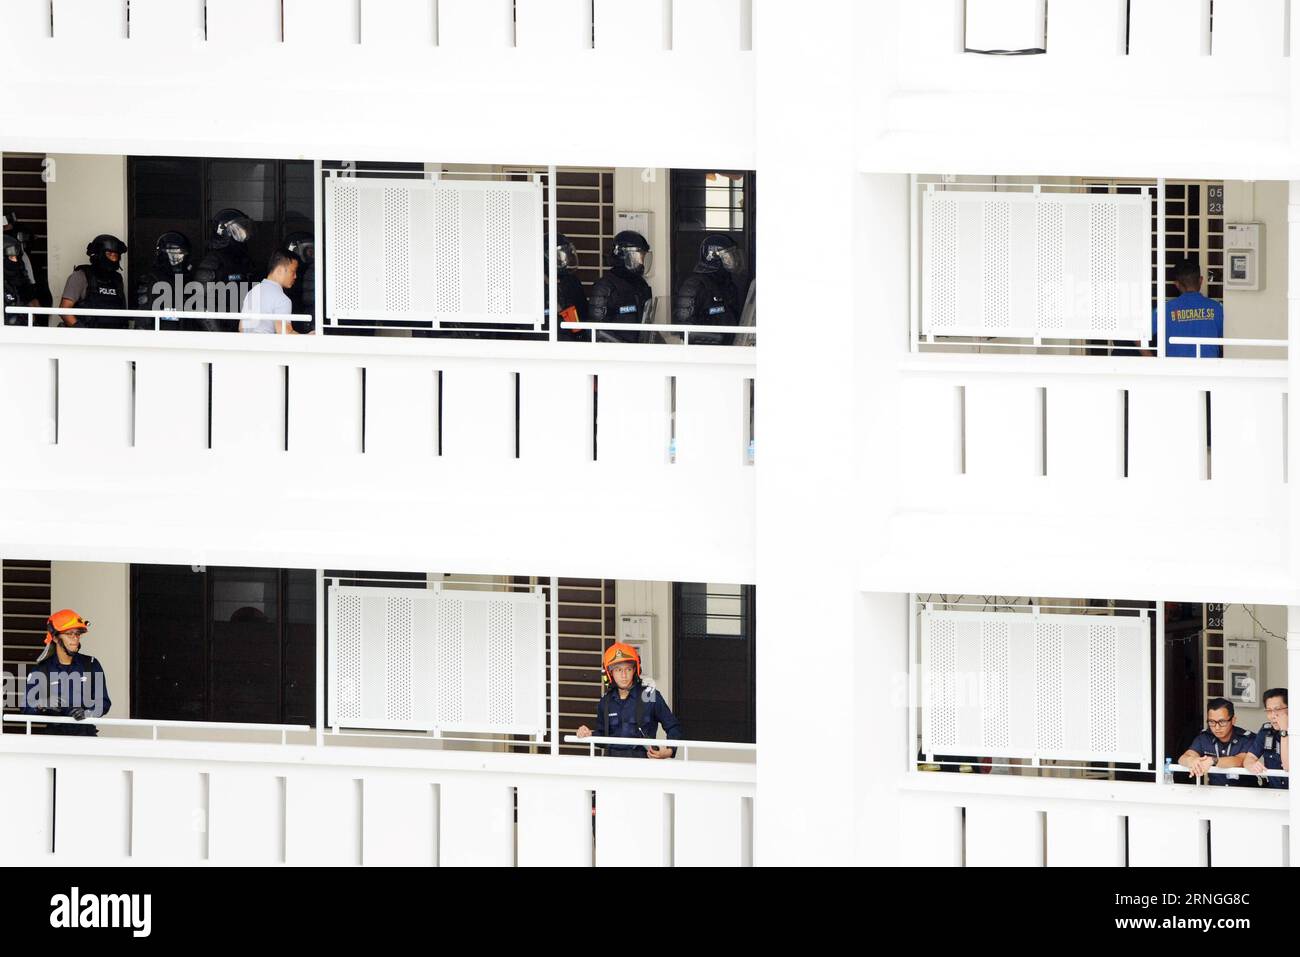 (160928) -- SINGAPORE, Sept. 28, 2016 -- Members of the Singapore Police Force (SPF) Special Tactics and Rescue team (top) await outside a public housing unit during a hostage rescue operation in Singapore s Sembawang, Sept. 28, 2016. The SPF successfully rescued a 2-year-old boy taken as a hostage for 17 hours by a man, who is the boyfriend of the hostage s mother. )(yk) SINGAPORE-SEMBAWANG-SPF-HOSTAGE RESCUE ThenxChihxWey PUBLICATIONxNOTxINxCHN   Singapore Sept 28 2016 Members of The Singapore Police Force SPF Special Tactics and Rescue Team Top await outside a Public Housing Unit during a H Stock Photo